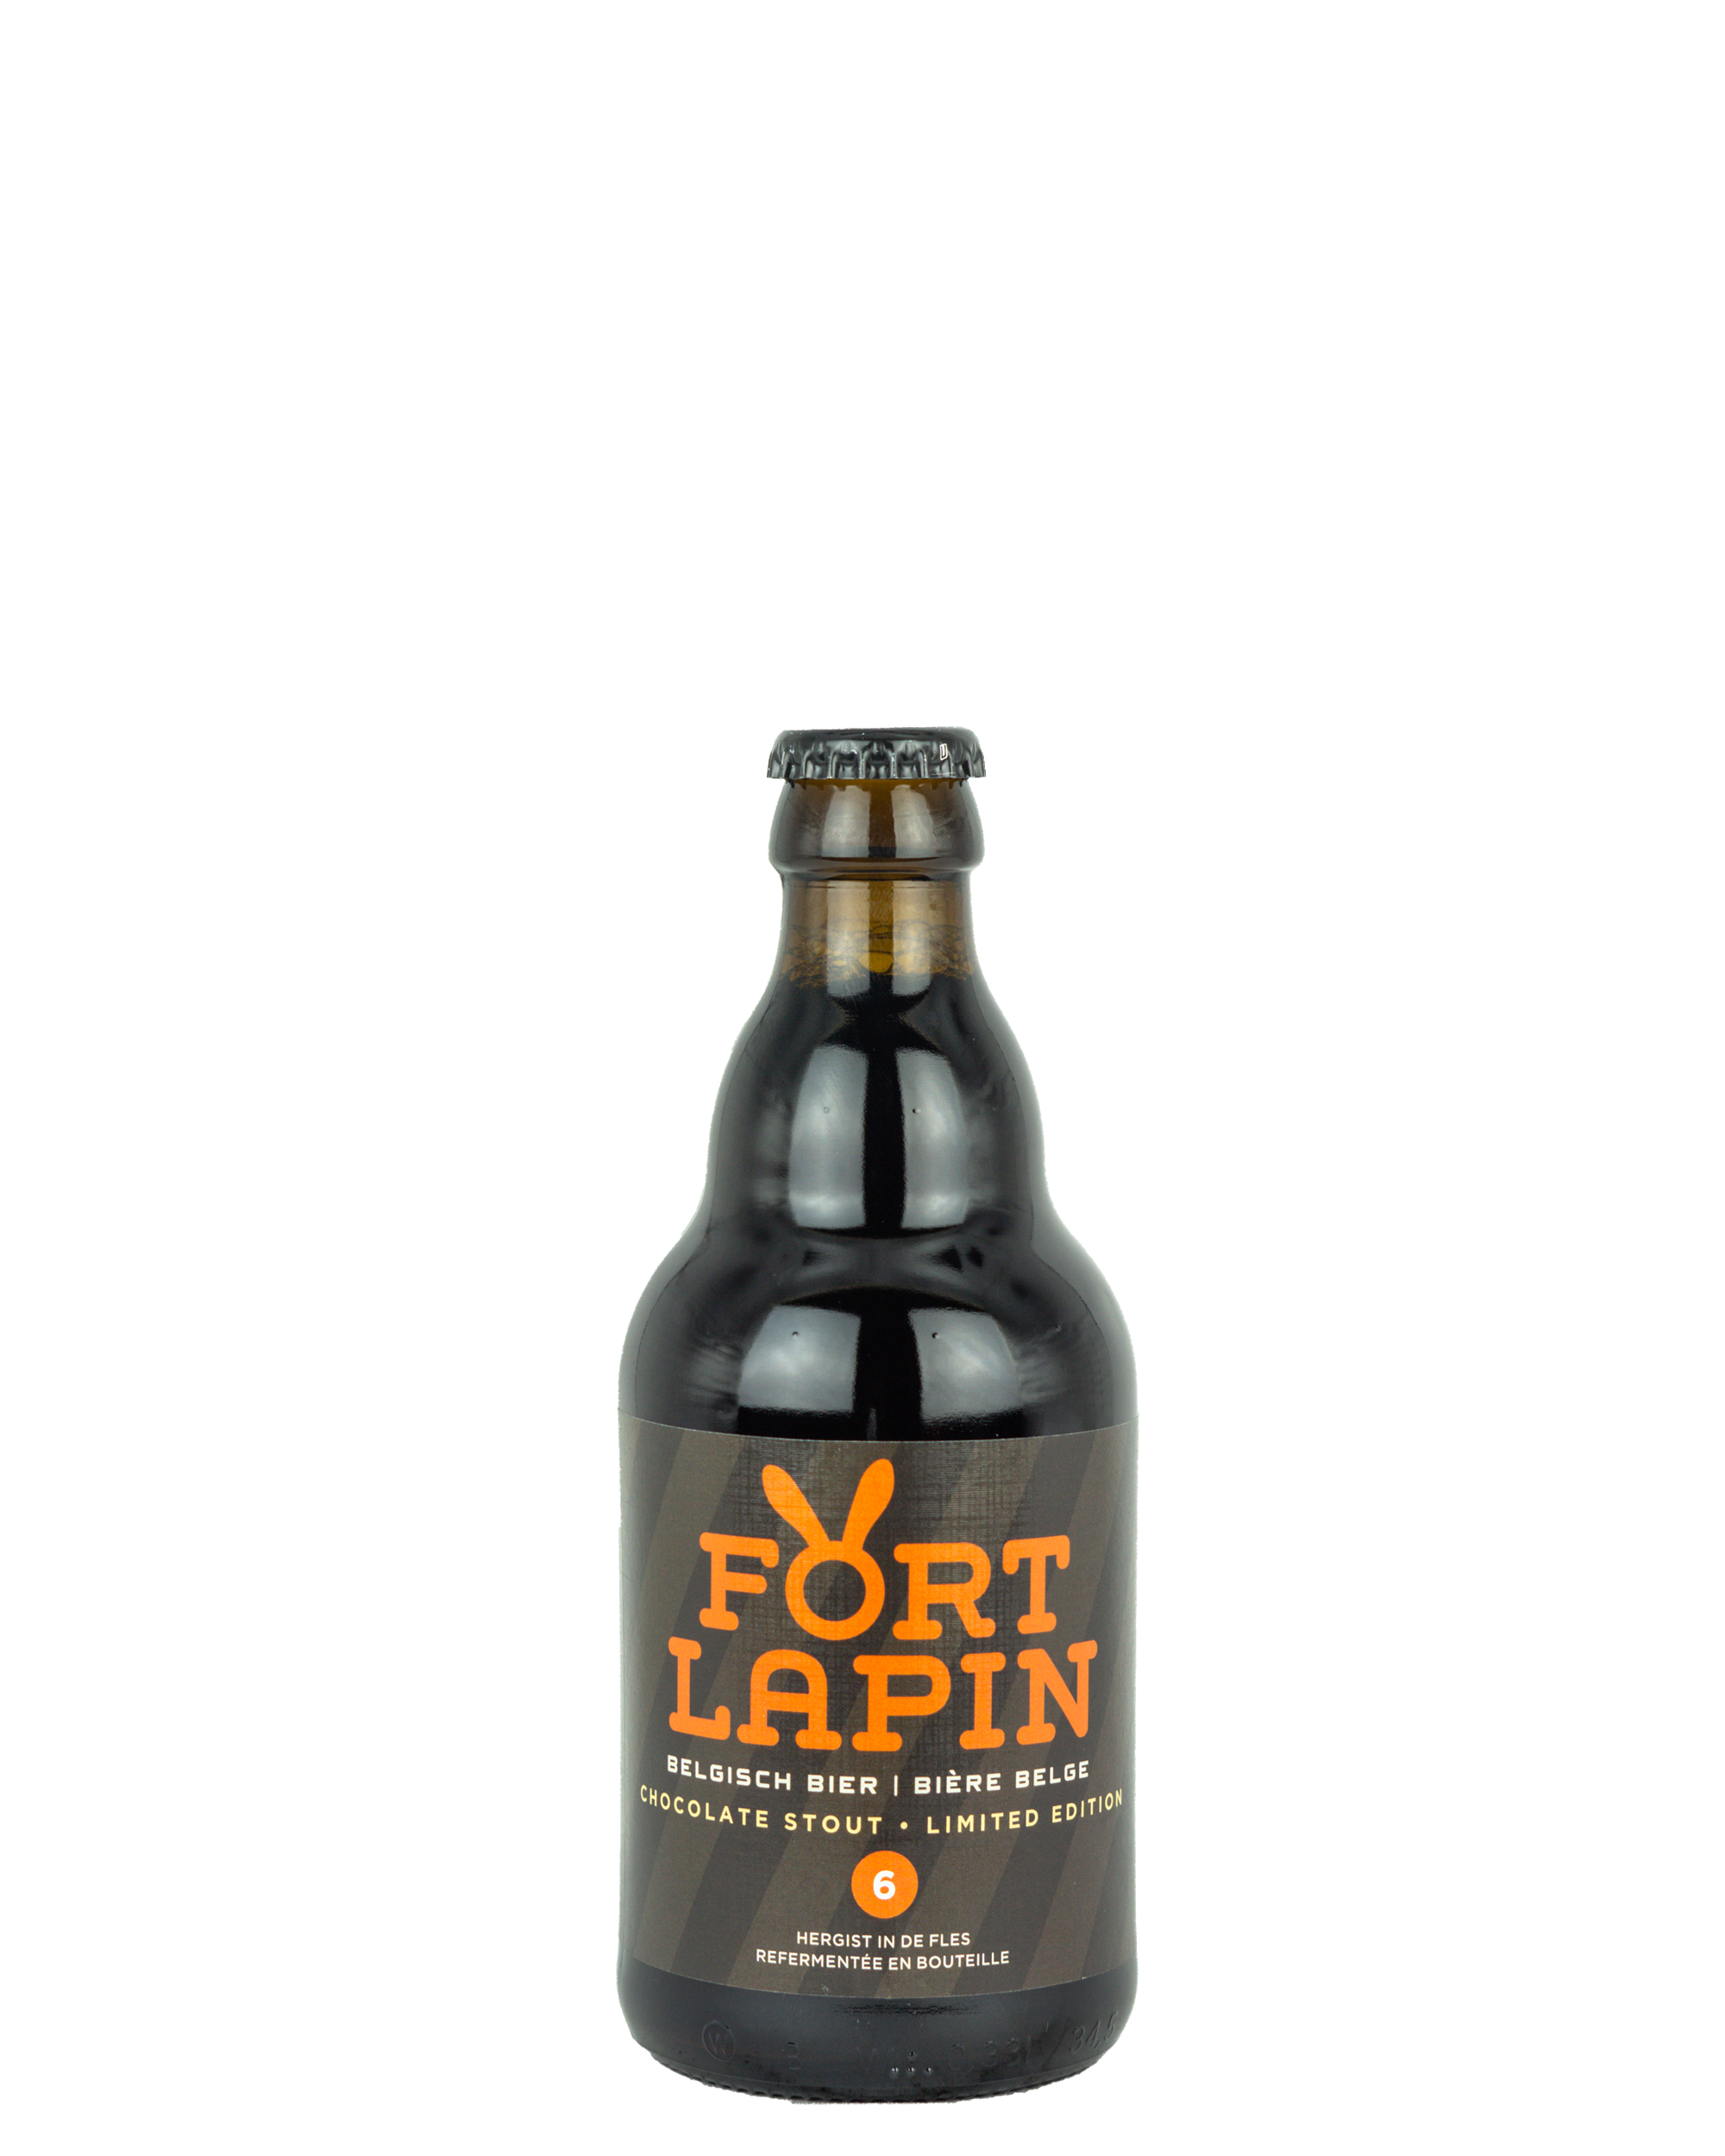 Fort Lapin 6 Chocolate Stout 33Cl